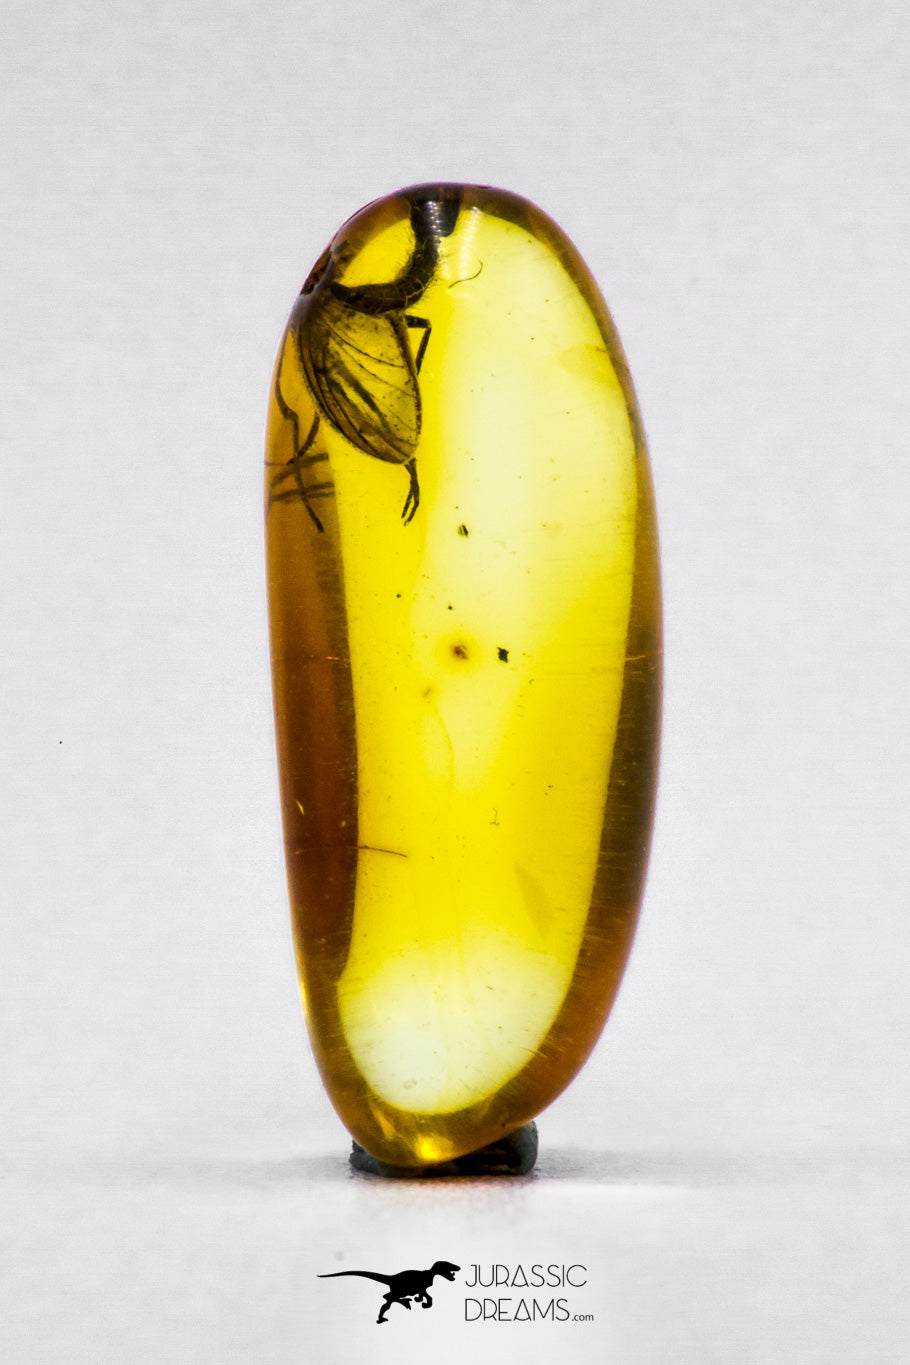 Collector Grade 0.56 Inch Baltic Amber With An Inclusion Of Fossil Insect  (Diptera - Sciaridae Fly) –